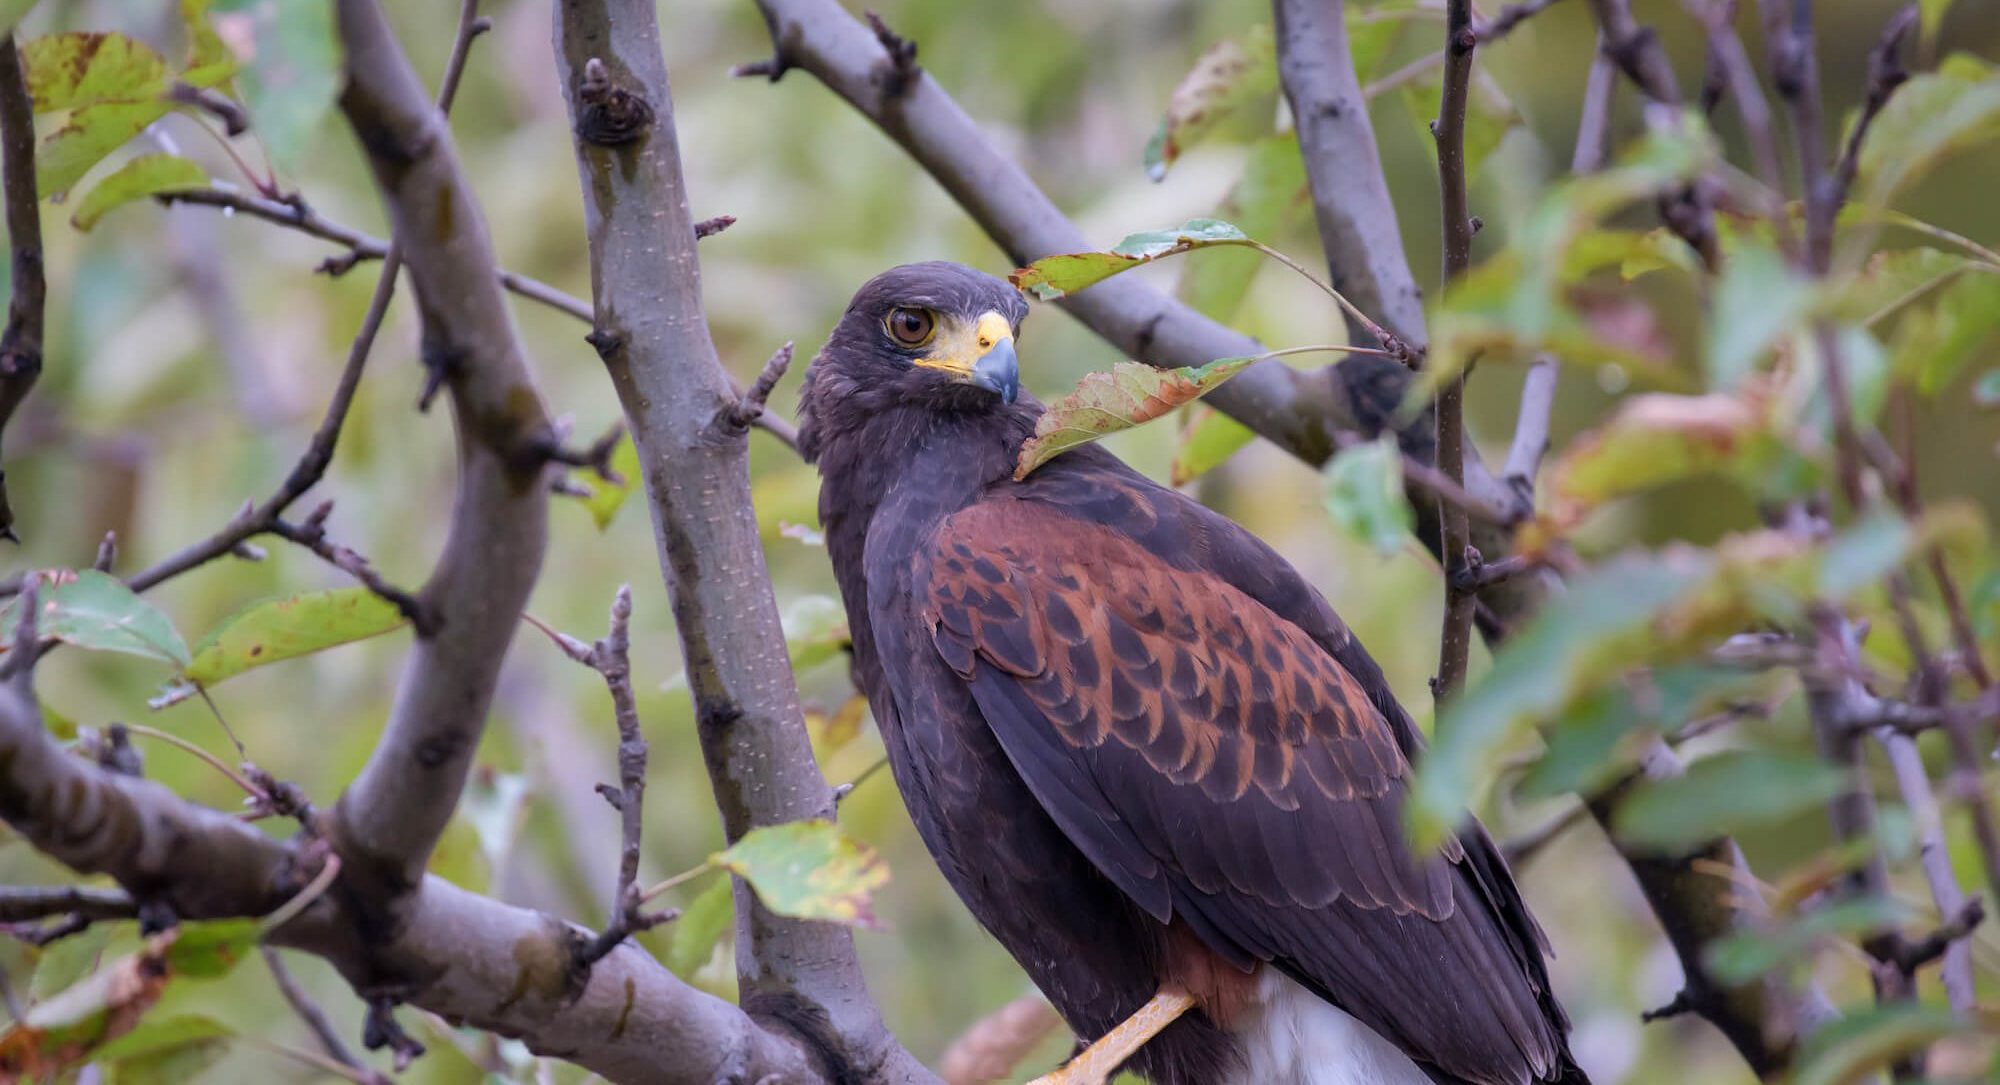 A Harris's Hawk perched on a branch